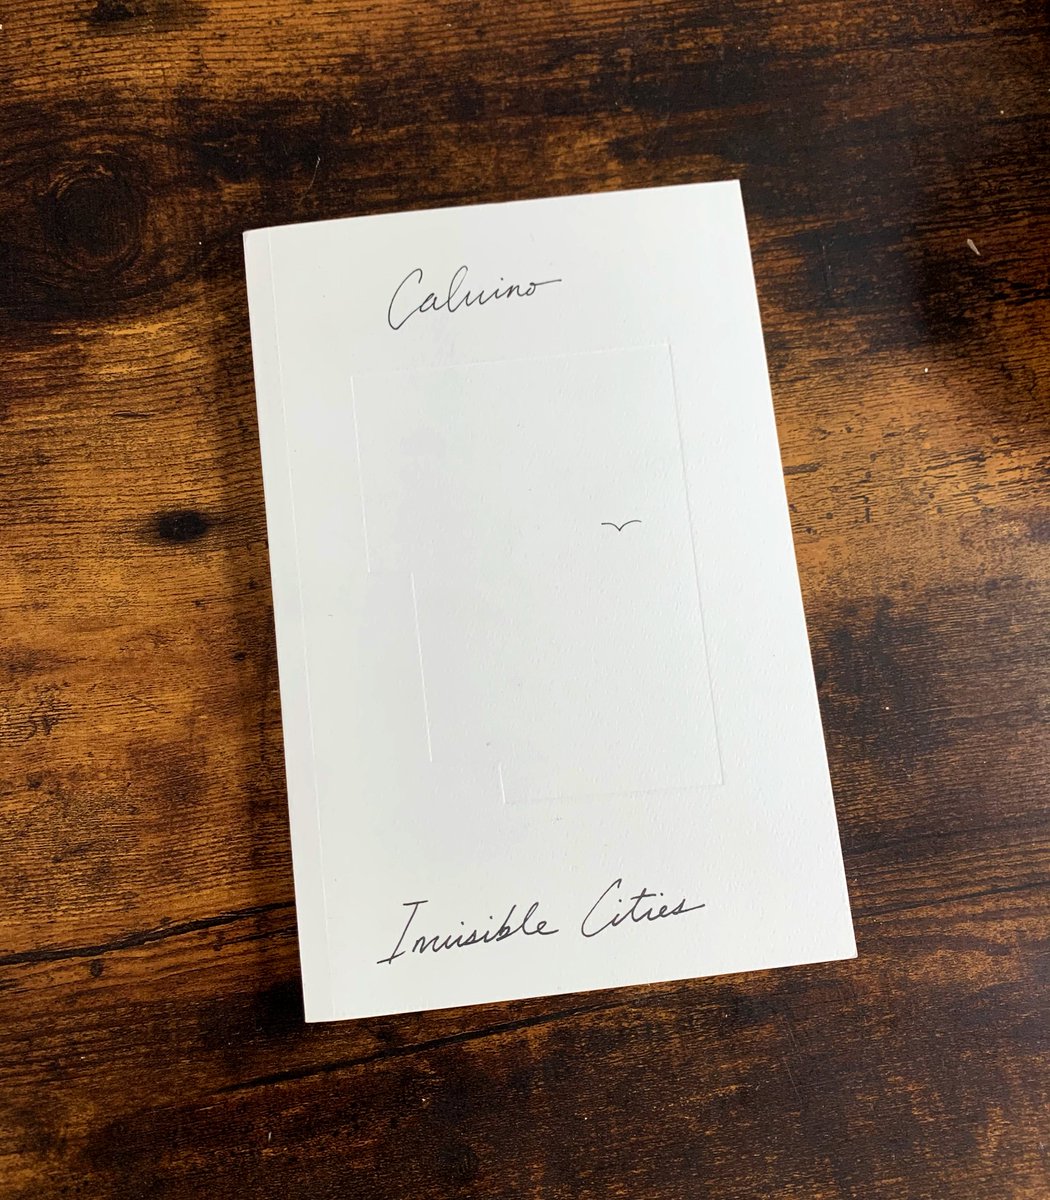 ultimately, we agreed we wanted something more quiet & minimal. i grabbed the fallen leaf from the previous idea, isolated it, and used the same calligraphic text from before. i really love this cover of calvino's INVISIBLE CITIES and wanted to nod to that (perhaps too closely).